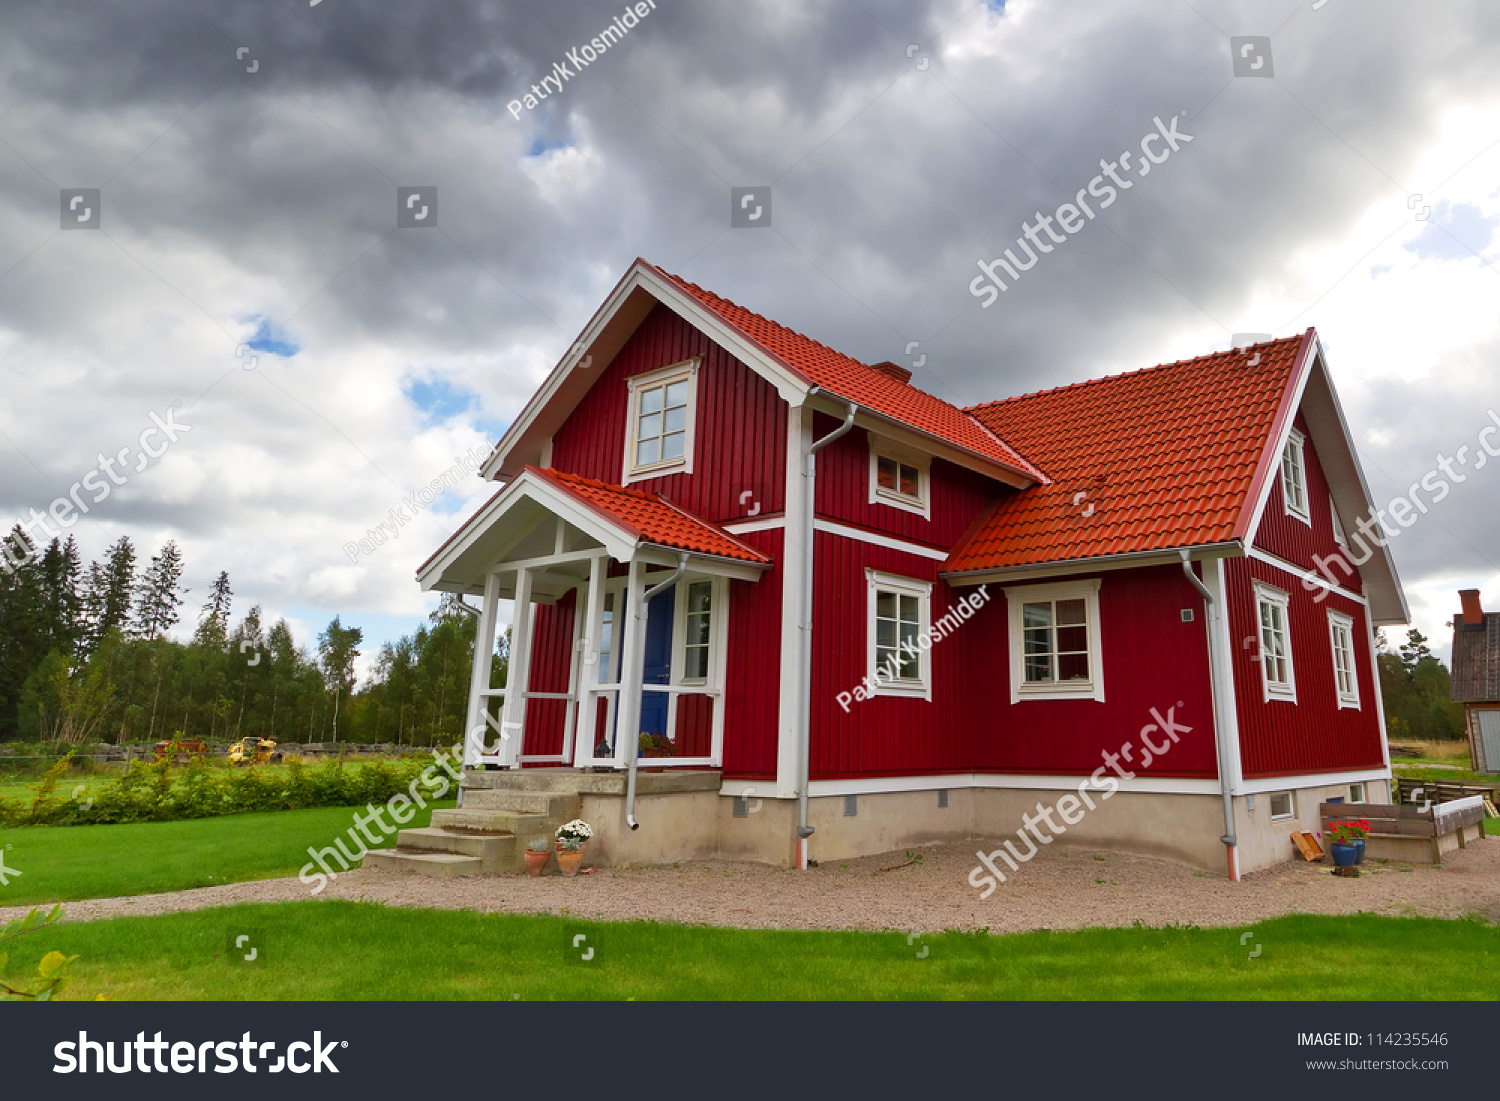 Image result for swedish houses